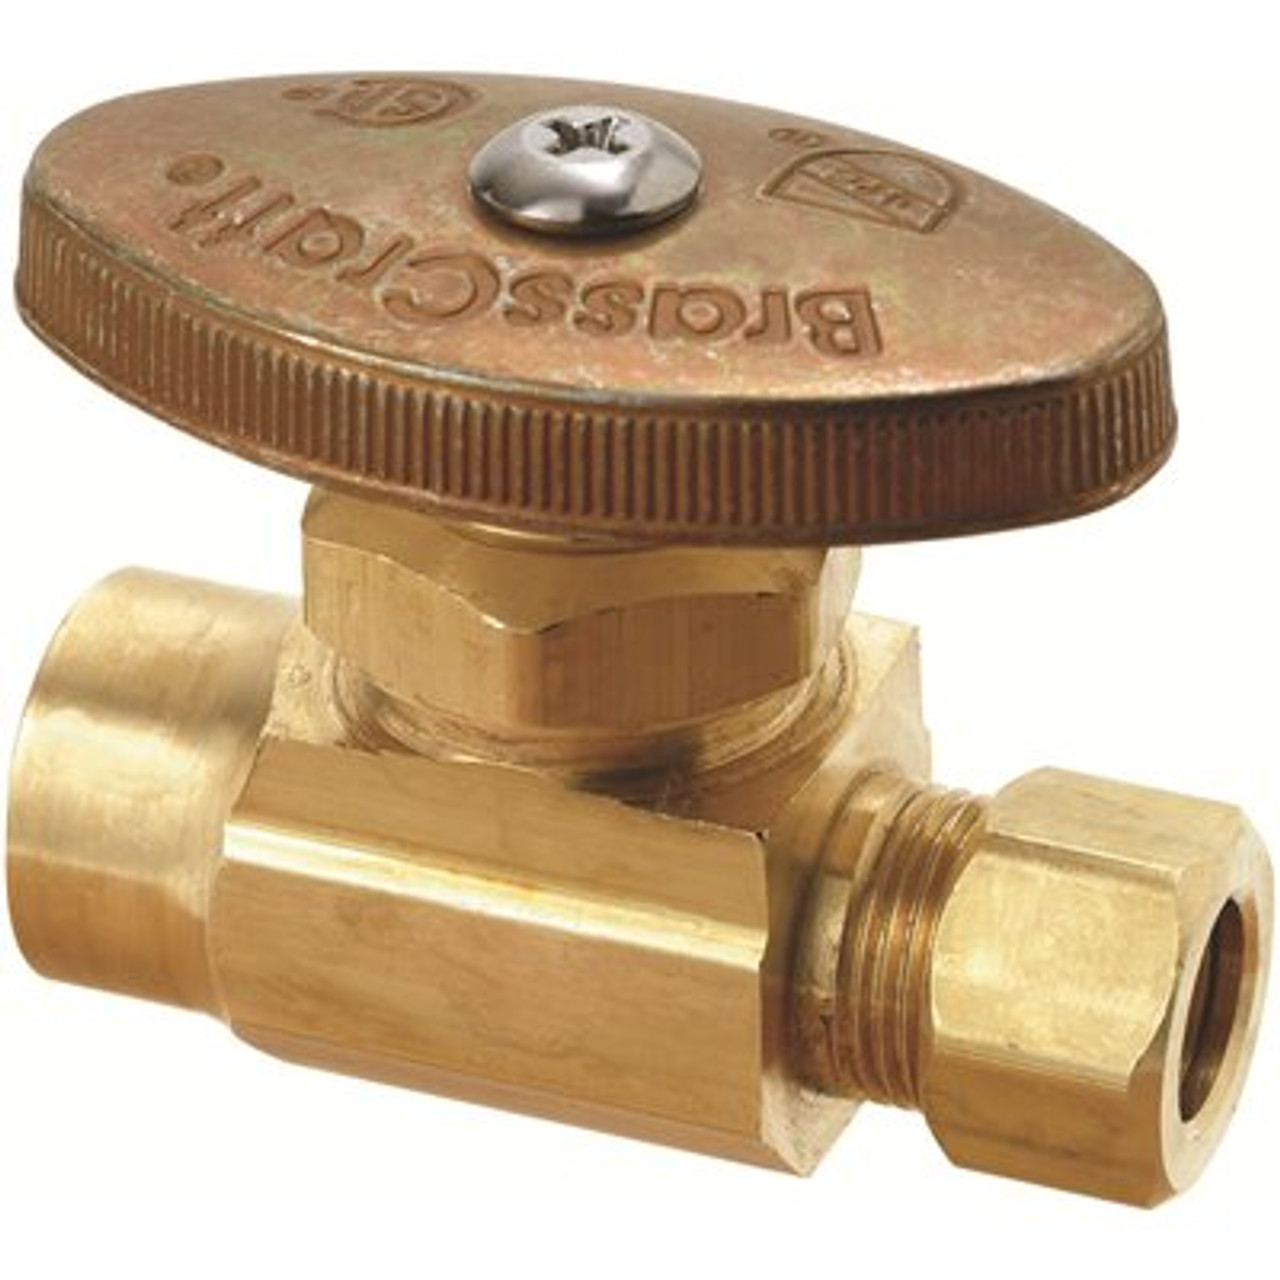 BrassCraft 1/2 in Nominal Sweat Inlet x 3/8 in. O.D. Compression Outlet Brass Multi-Turn Straight Valve in Rough Brass